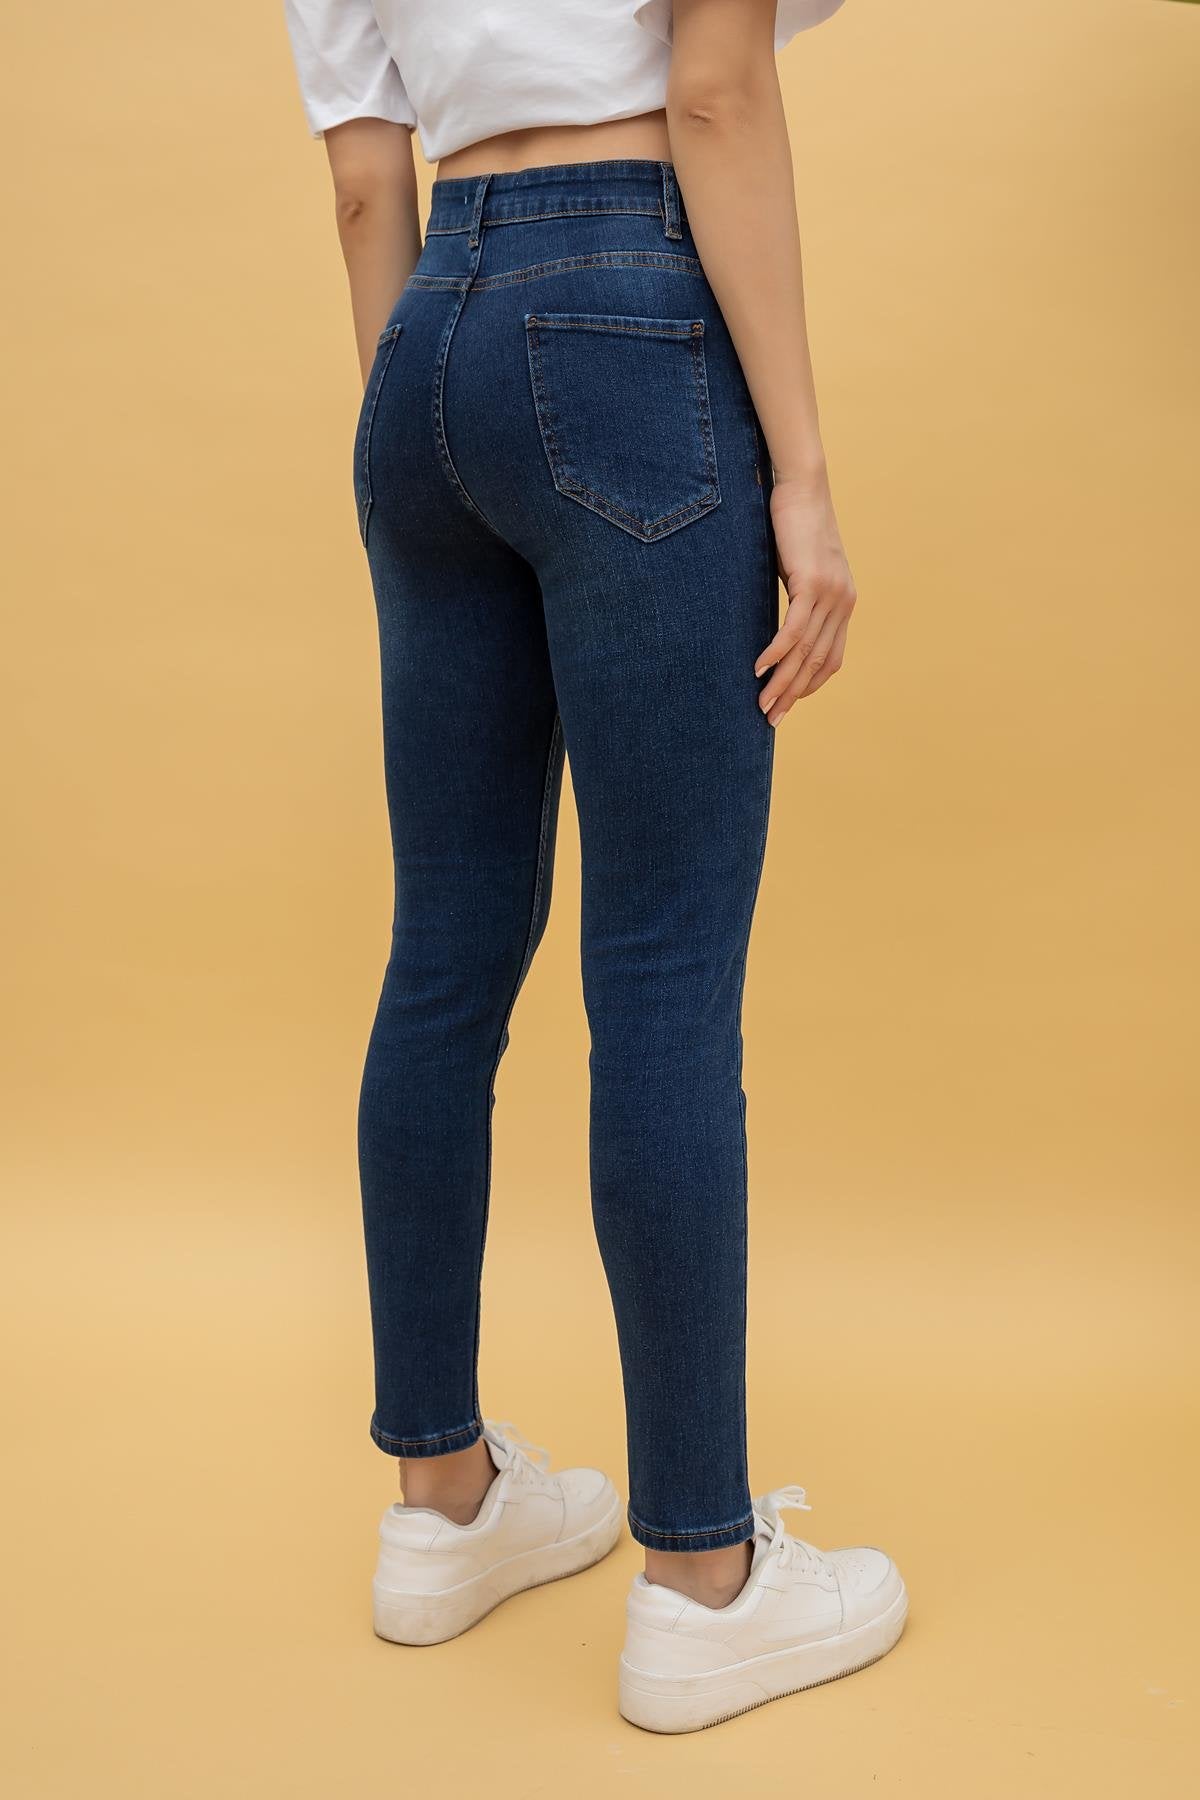 Washed Jean Trousers - DARK BLUE